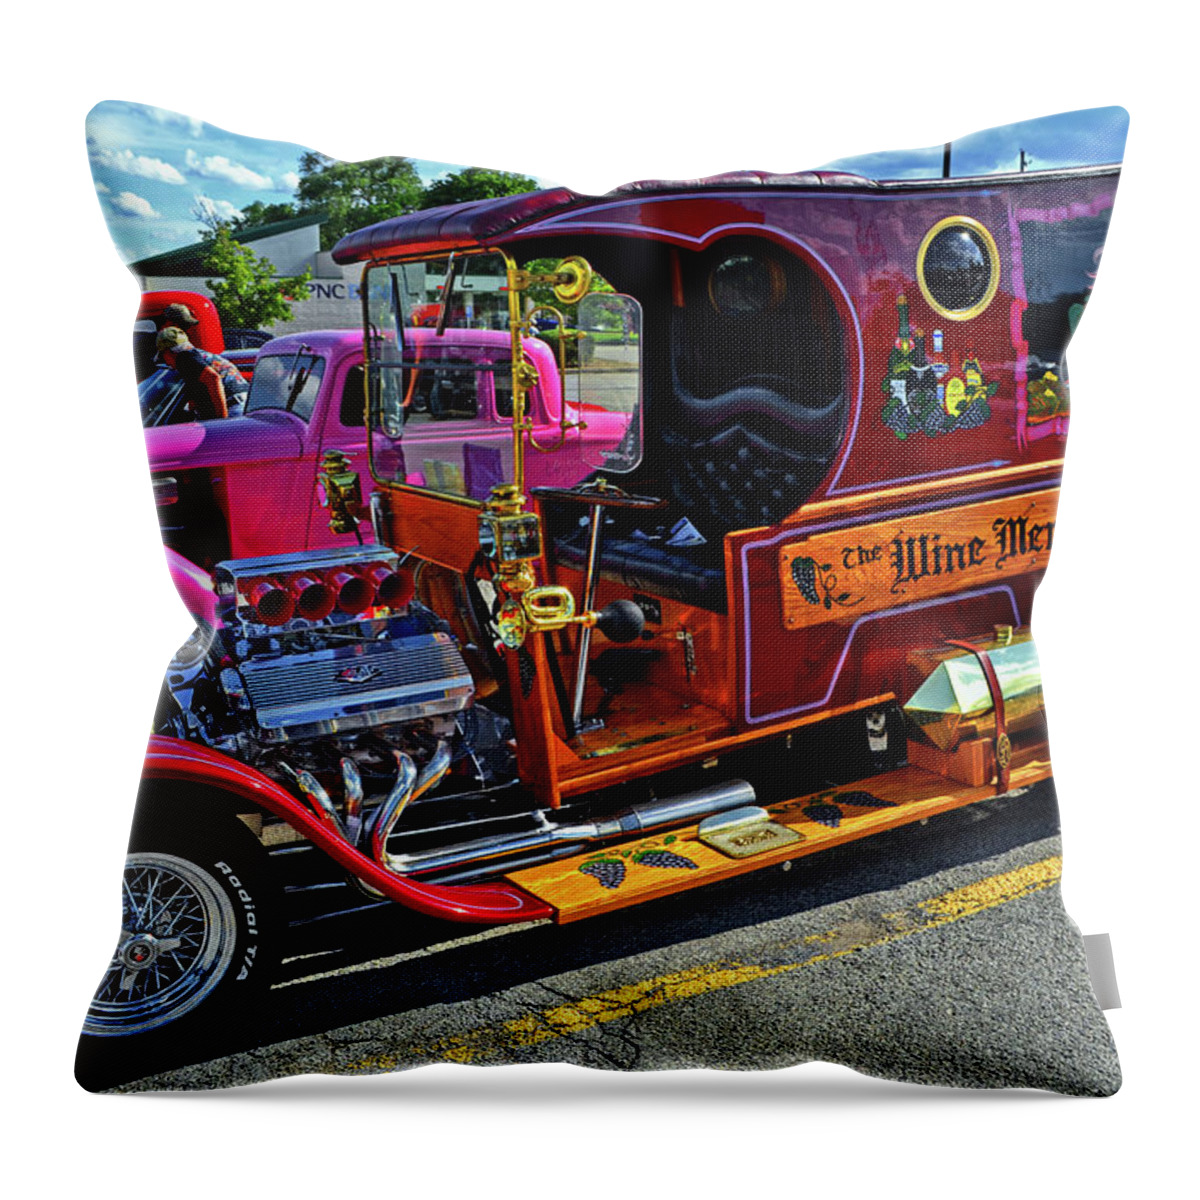 Automobile Throw Pillow featuring the photograph The Wine Merchant 001 by George Bostian